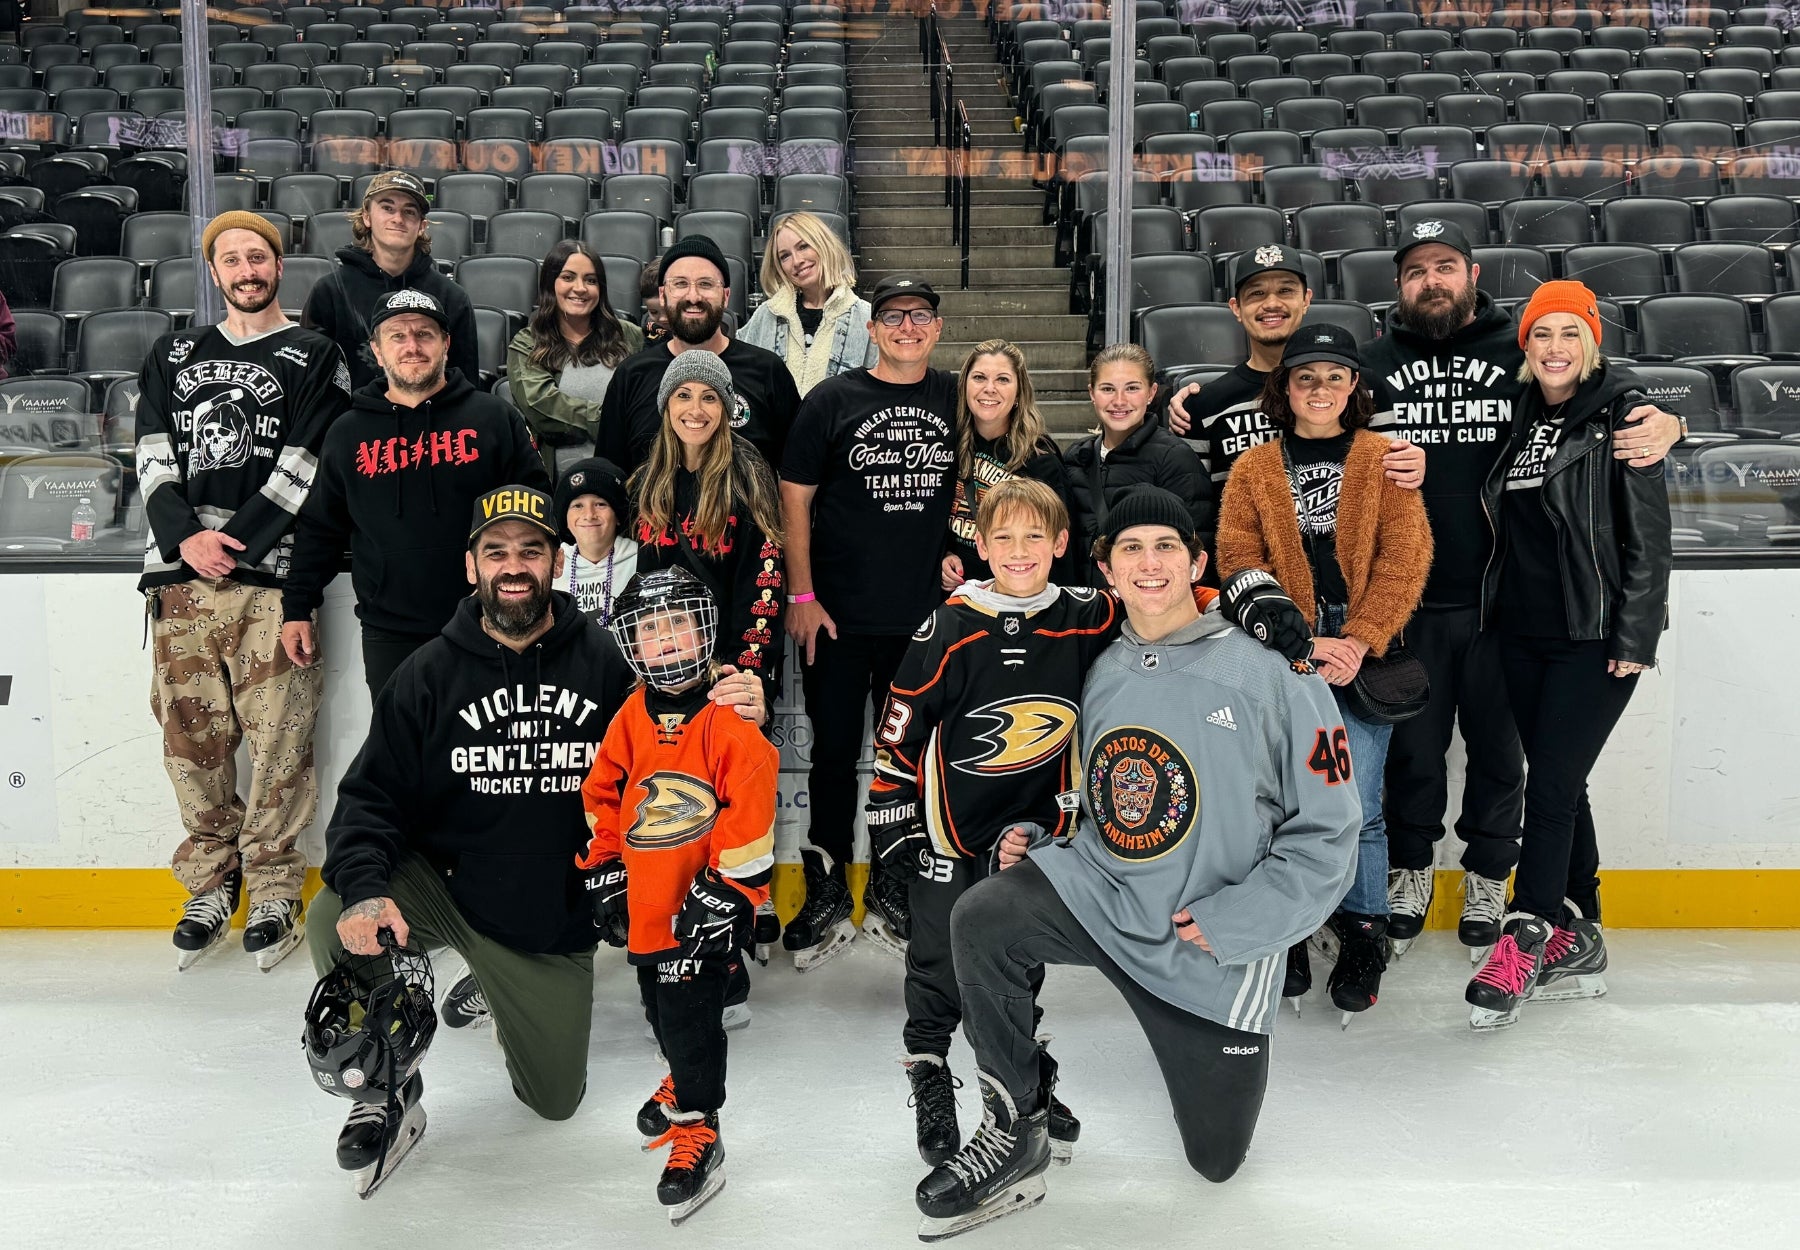 Violent Gentlemen Hockey Clothing Company visits Honda Center, the home of the Anaheim Ducks for a hockey game against the Vegas Golden Knights. Here are some of our favorite memories skating on the ice after the game.